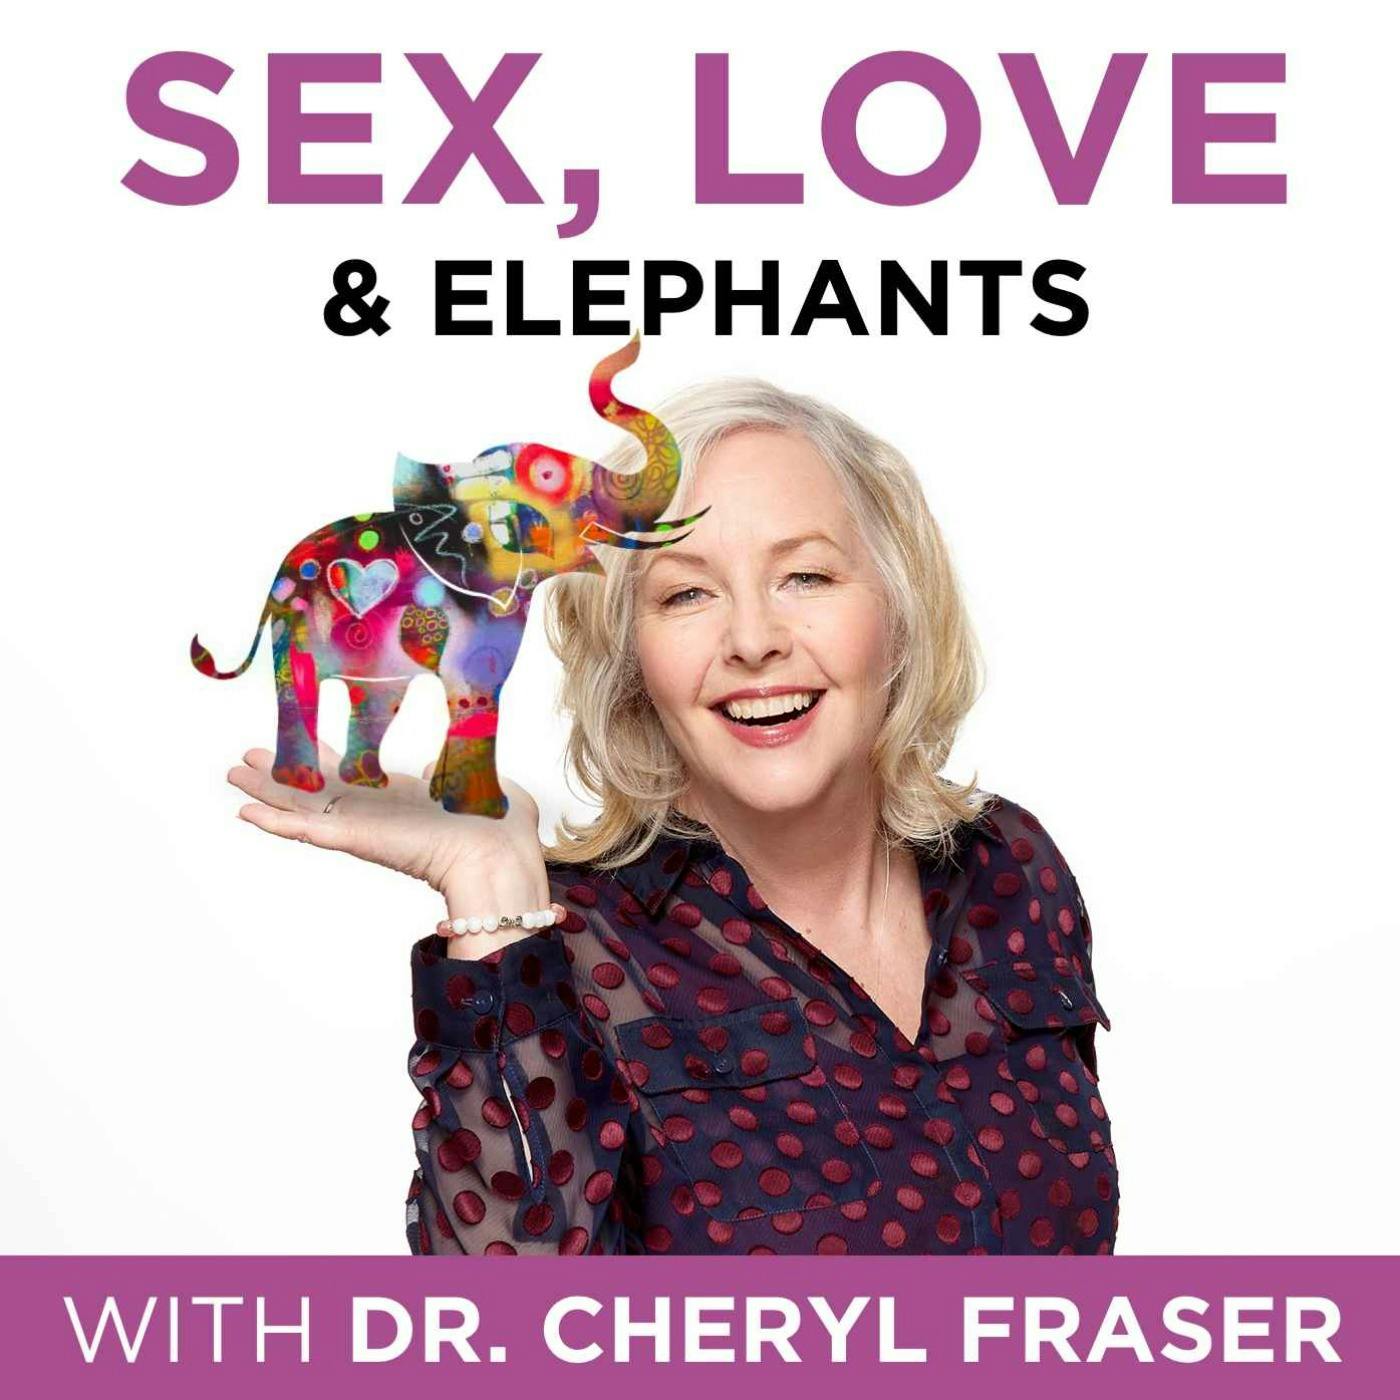 You Don’t Have to Be Special to Be Loved: A Dharma Talk with Dr. Cheryl